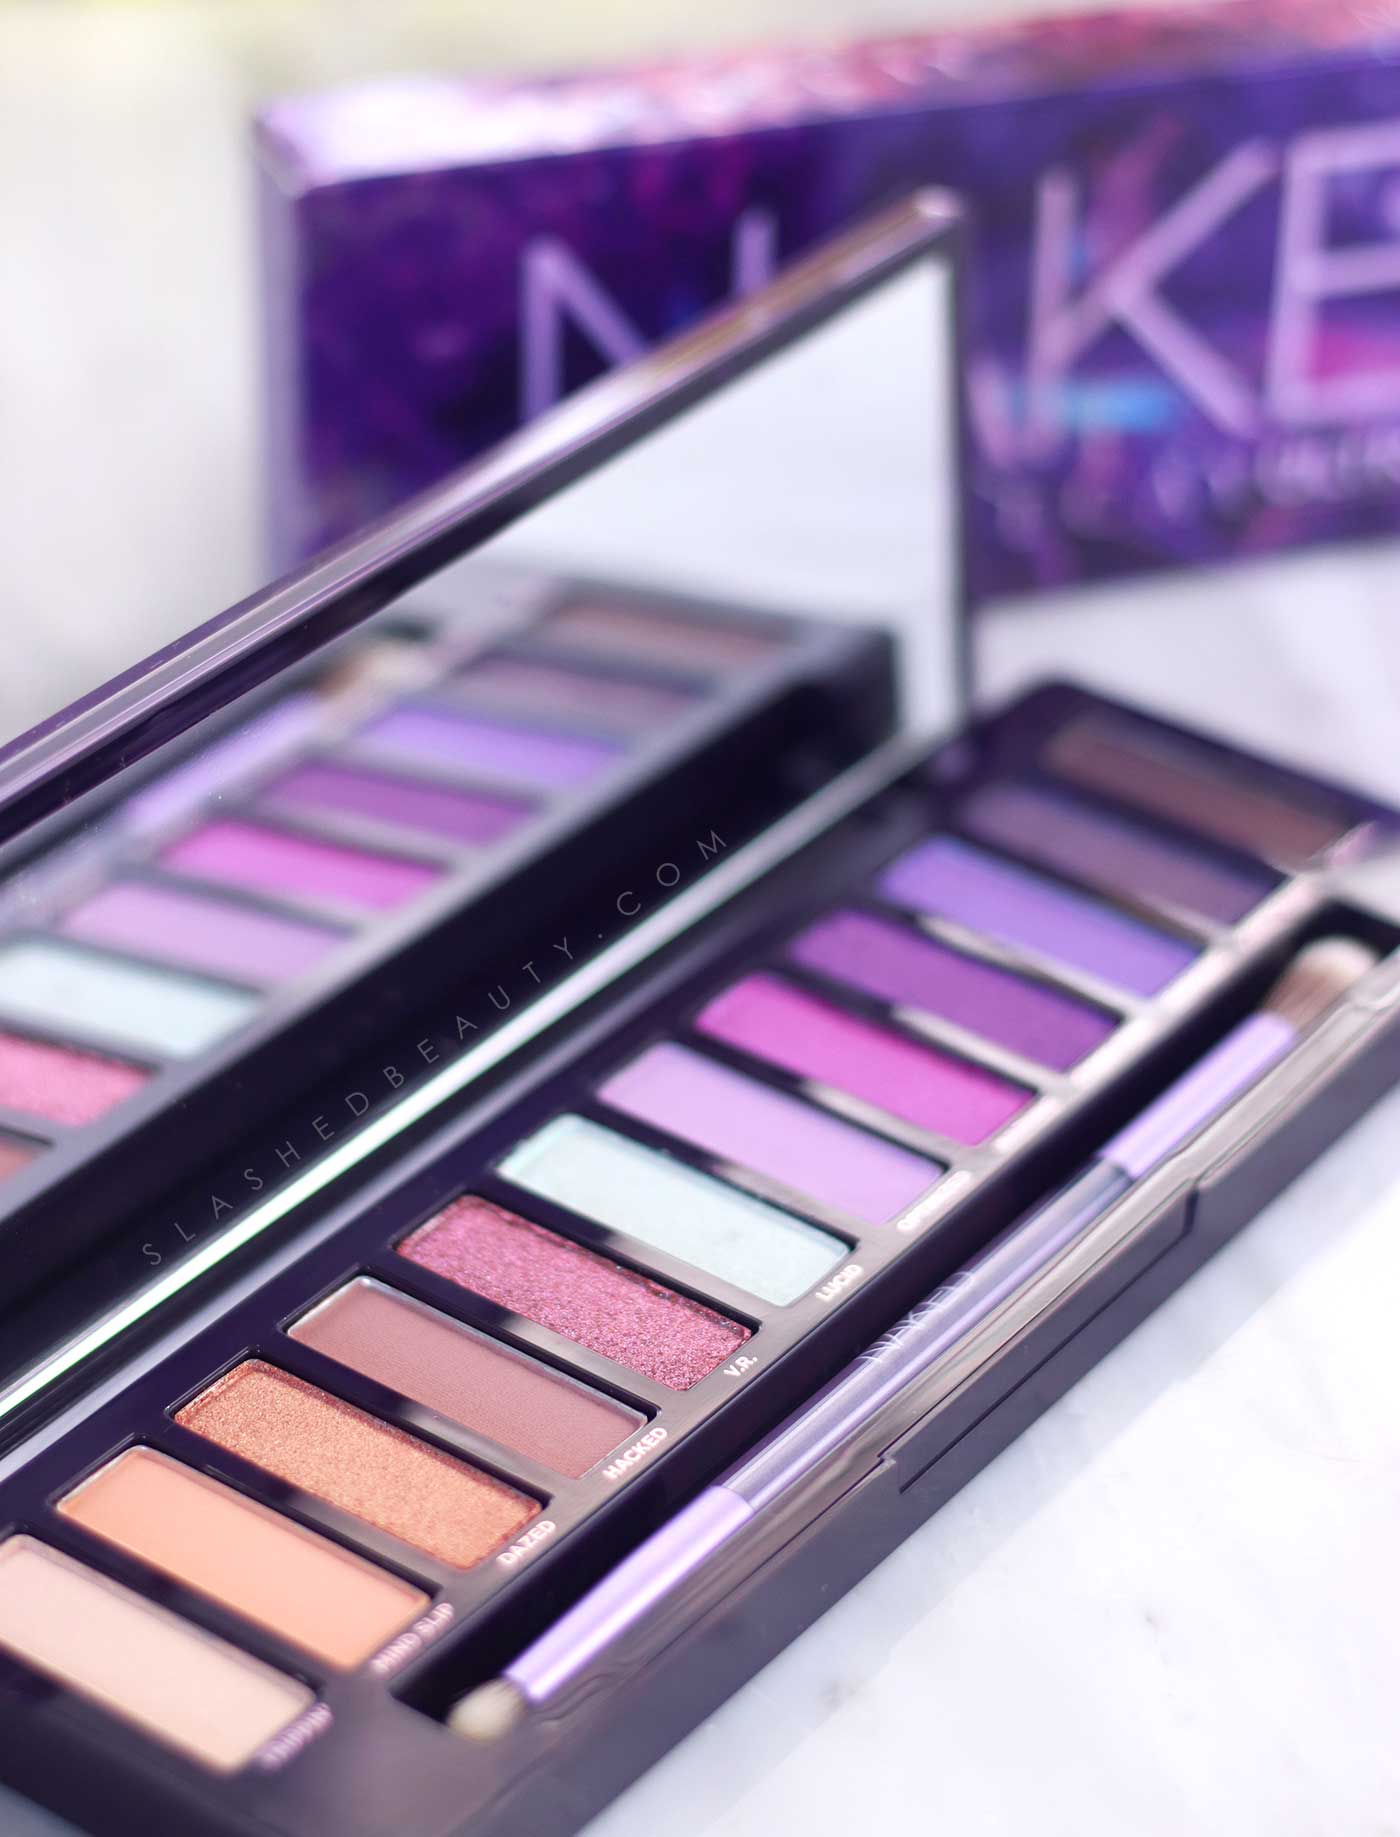 Urban Decay Naked Ultraviolet Palette more discount.